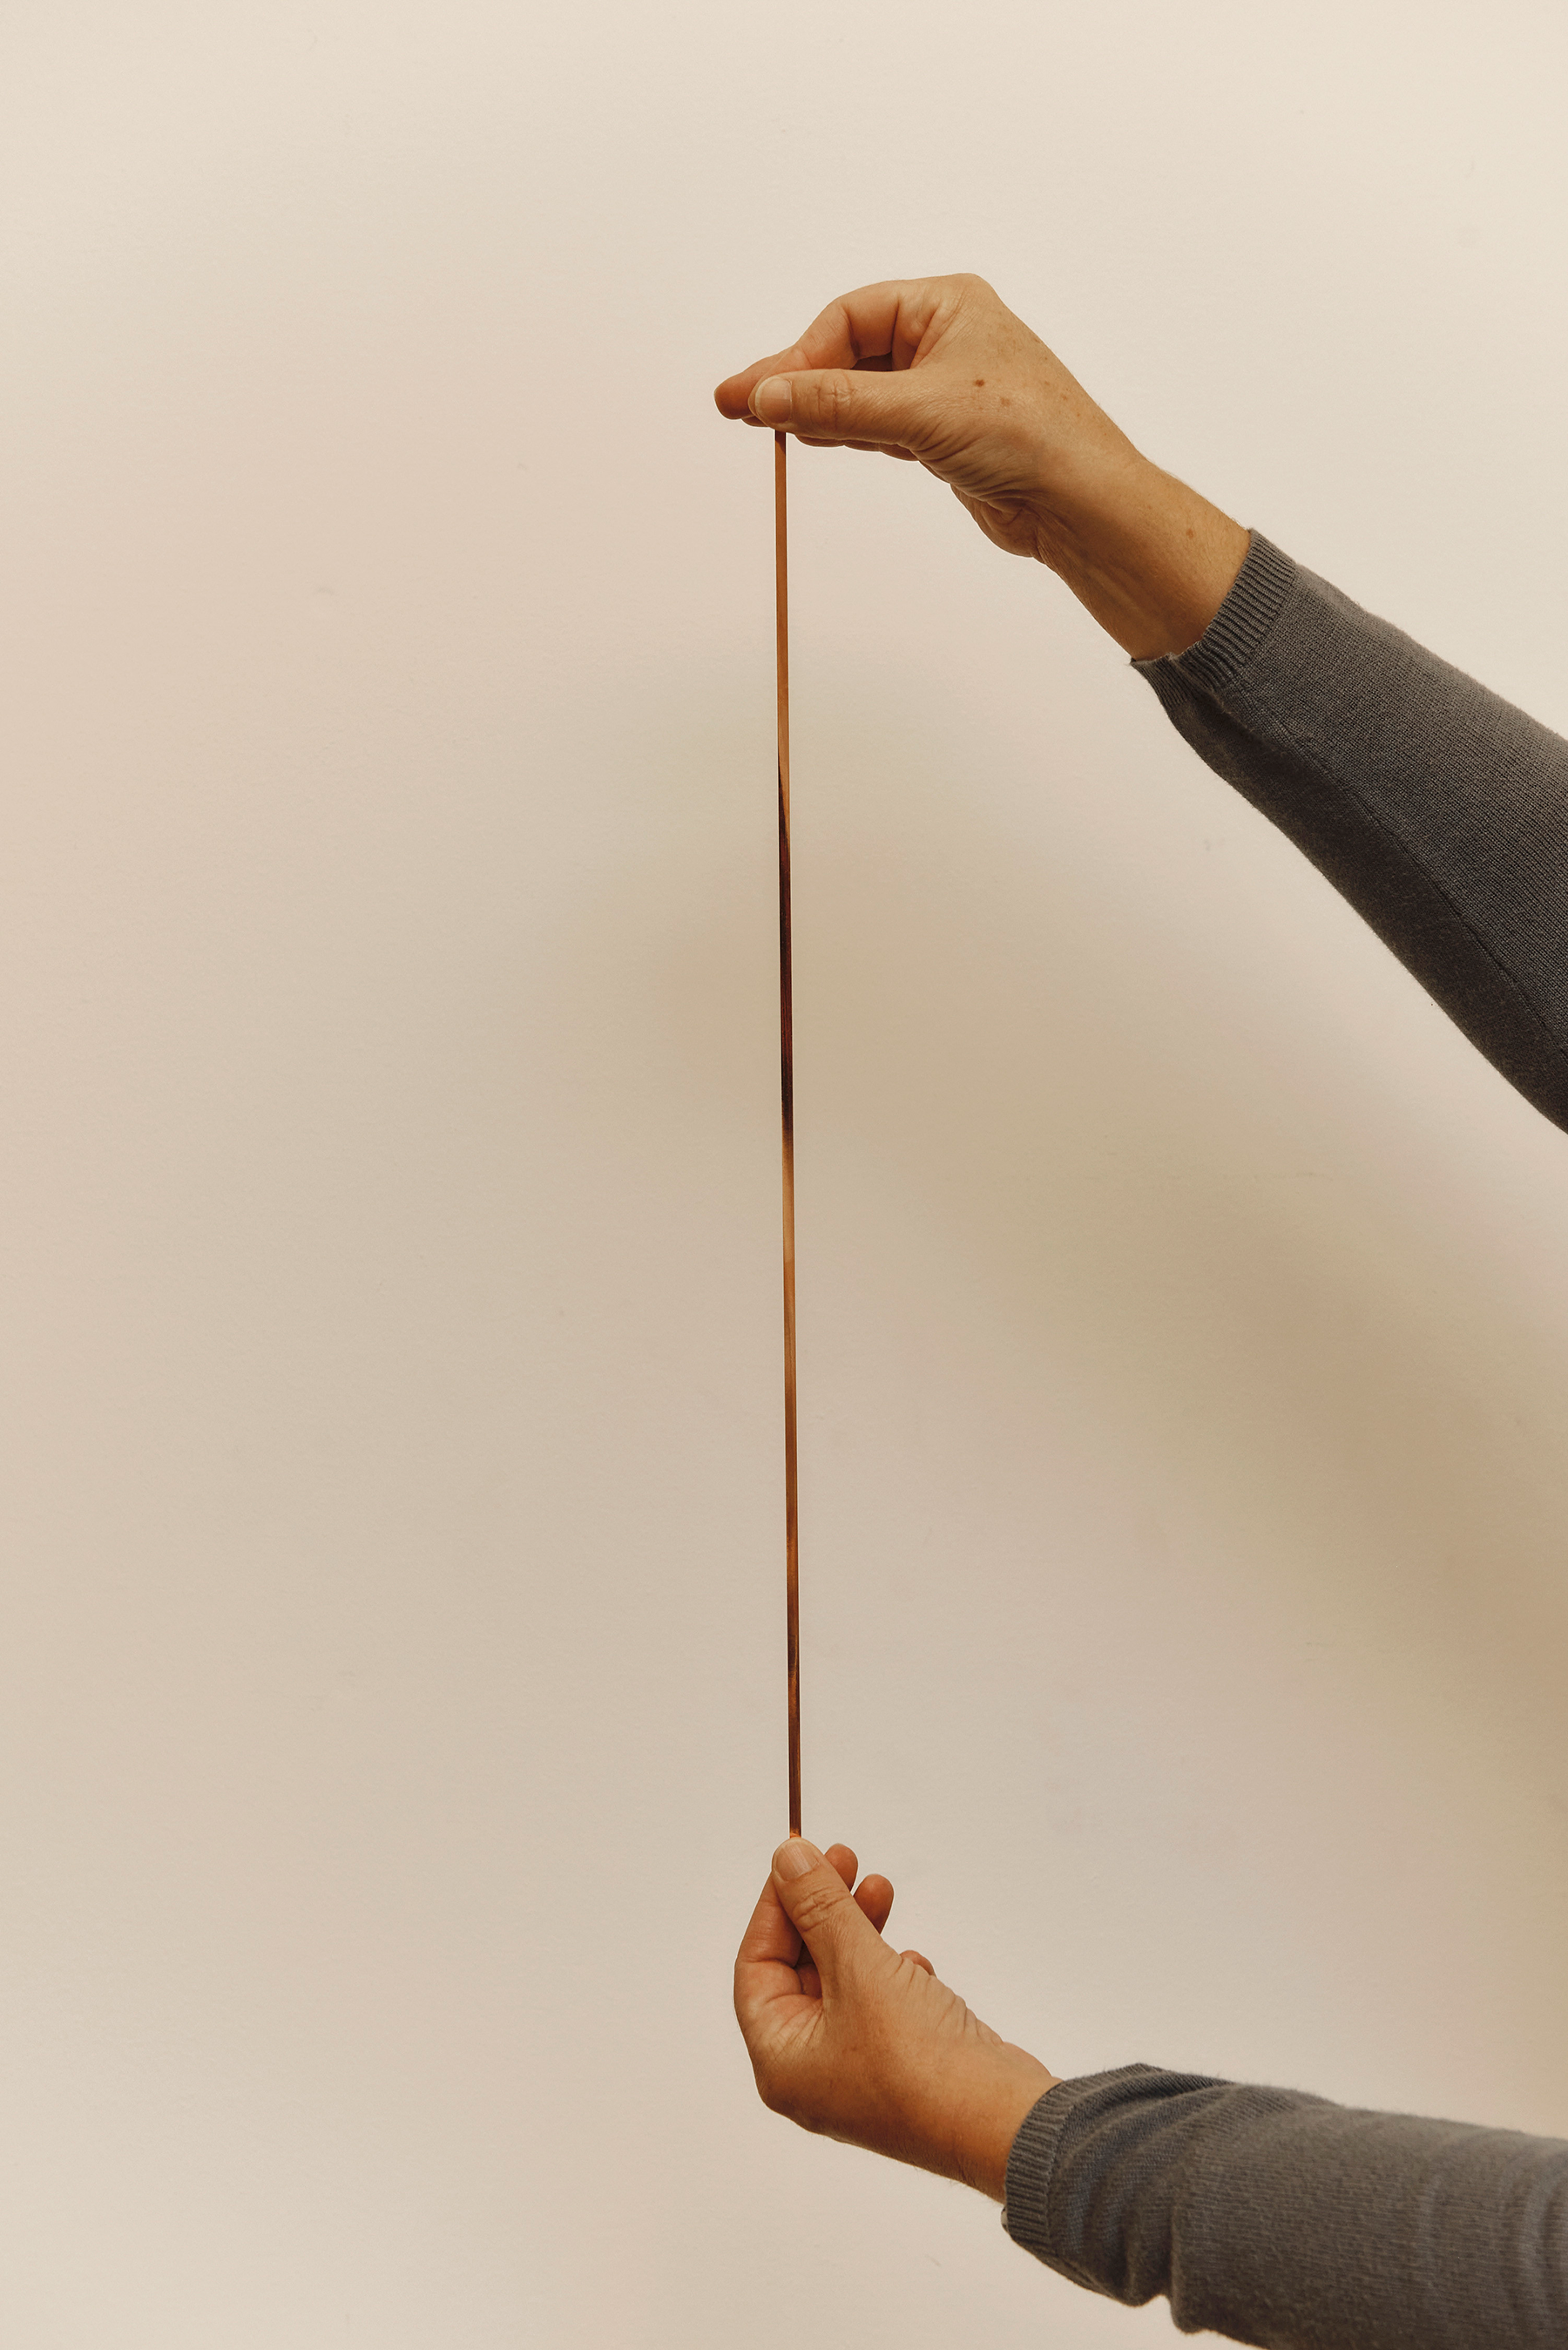 A long thin strip of coppery material is held vertically between a pair of hands in front of a beige background.